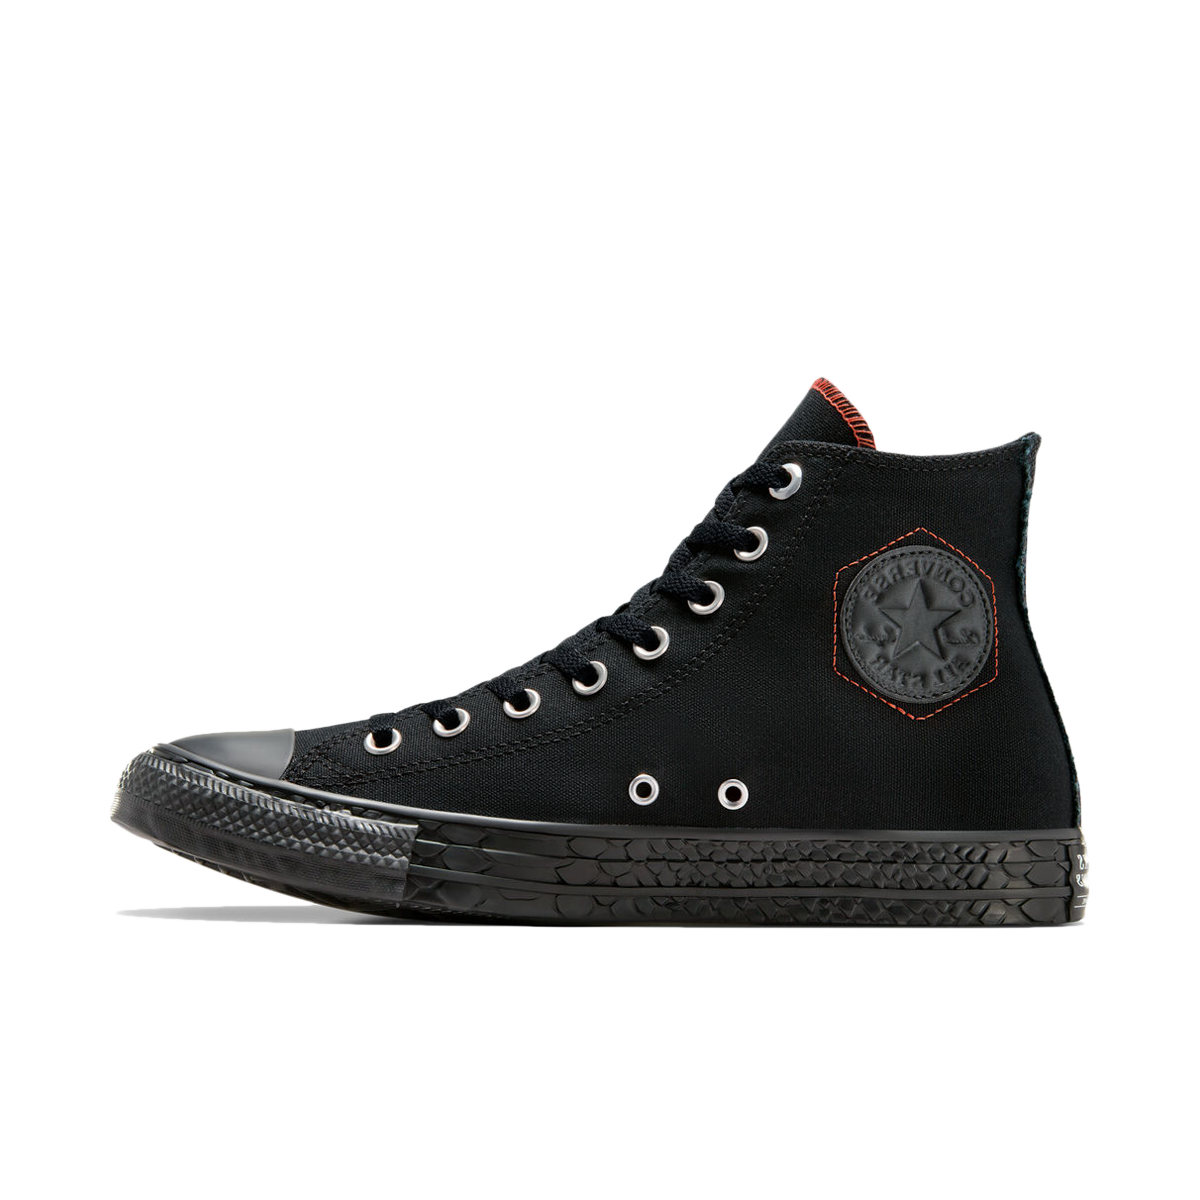 Dungeons & Dragons x Converse Chuck Taylor All Star 'Dragon Scales' A09886C